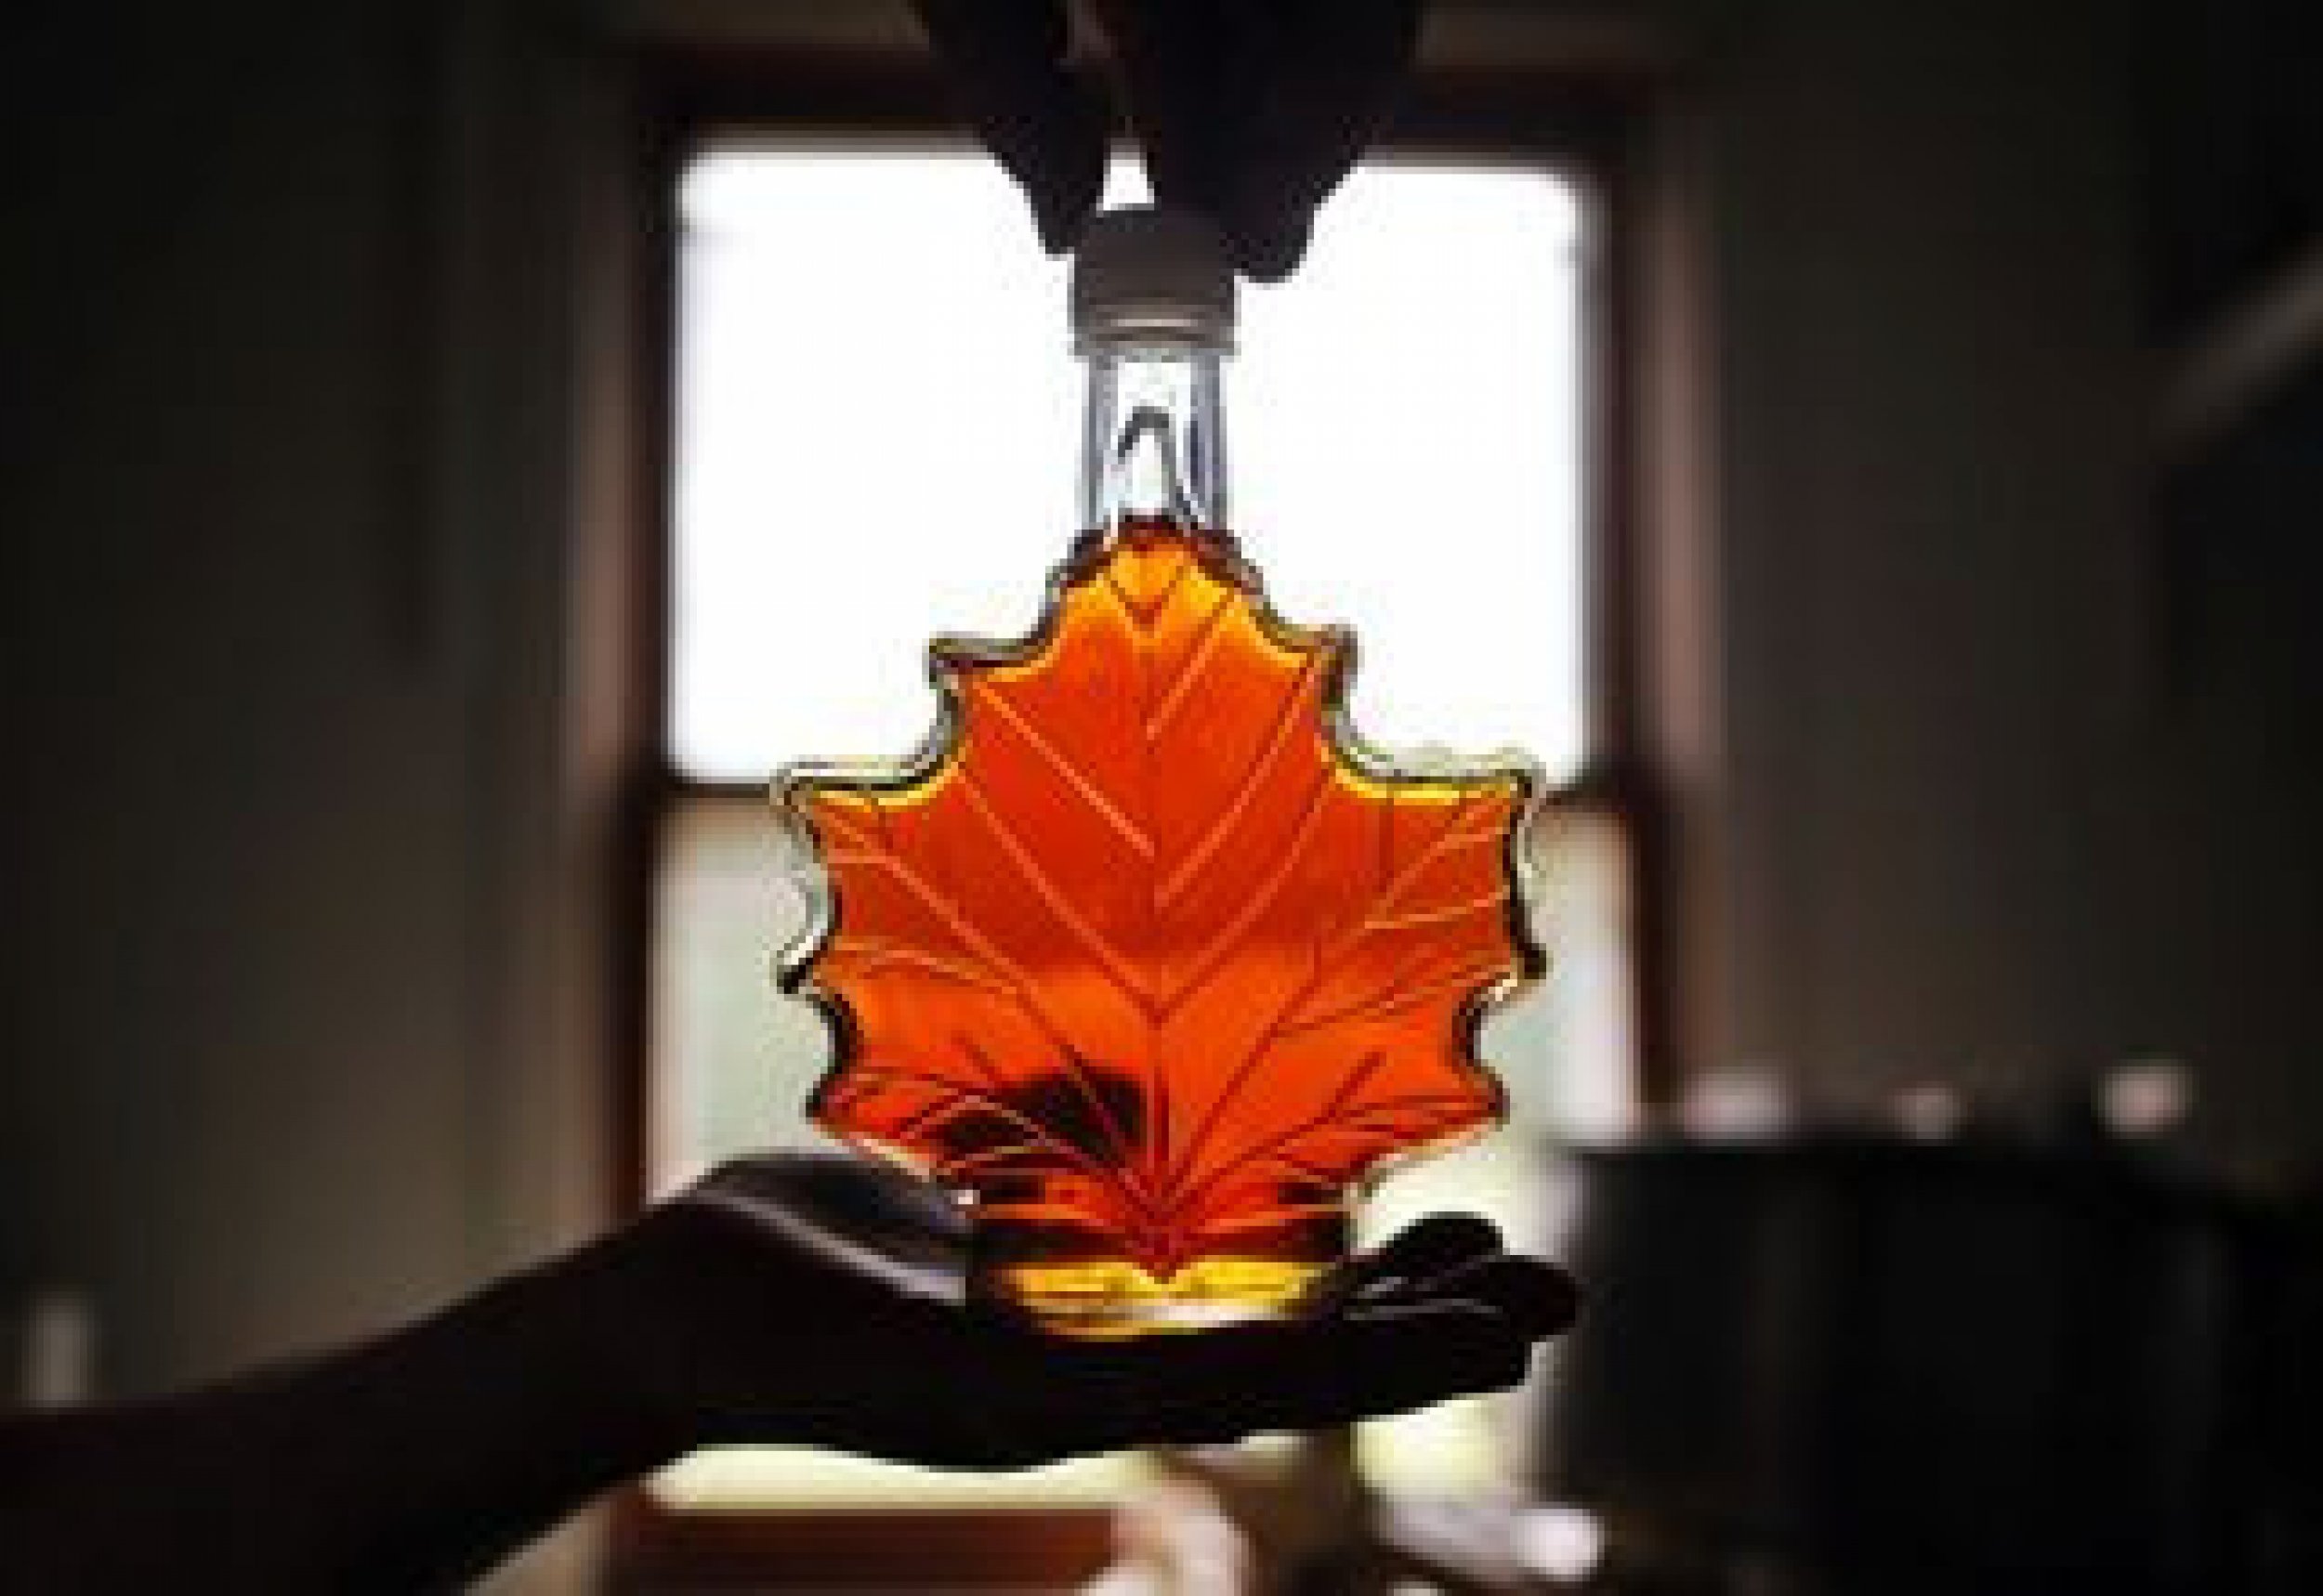 How To Properly Observe National Maple Syrup Day